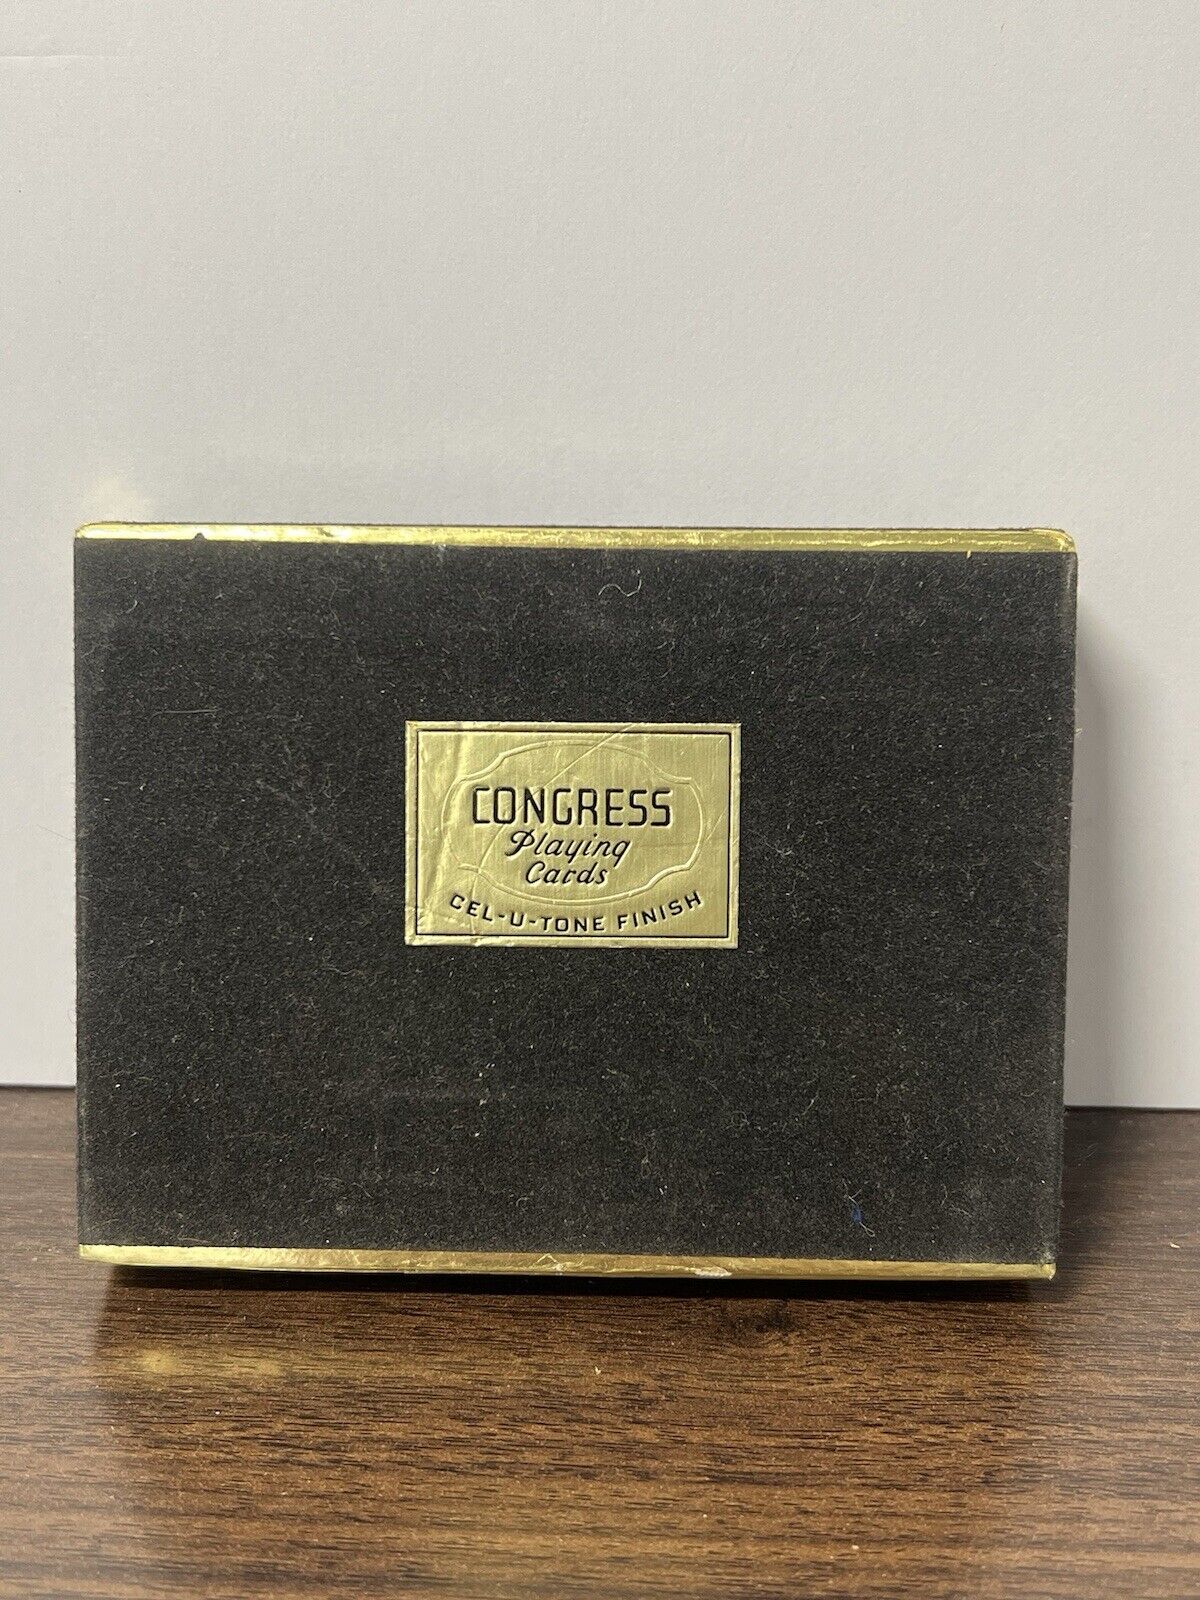 Vintage Congress Playing Cards Cel-U-Tone Finish - 2 Floral Decks, PREOWNED